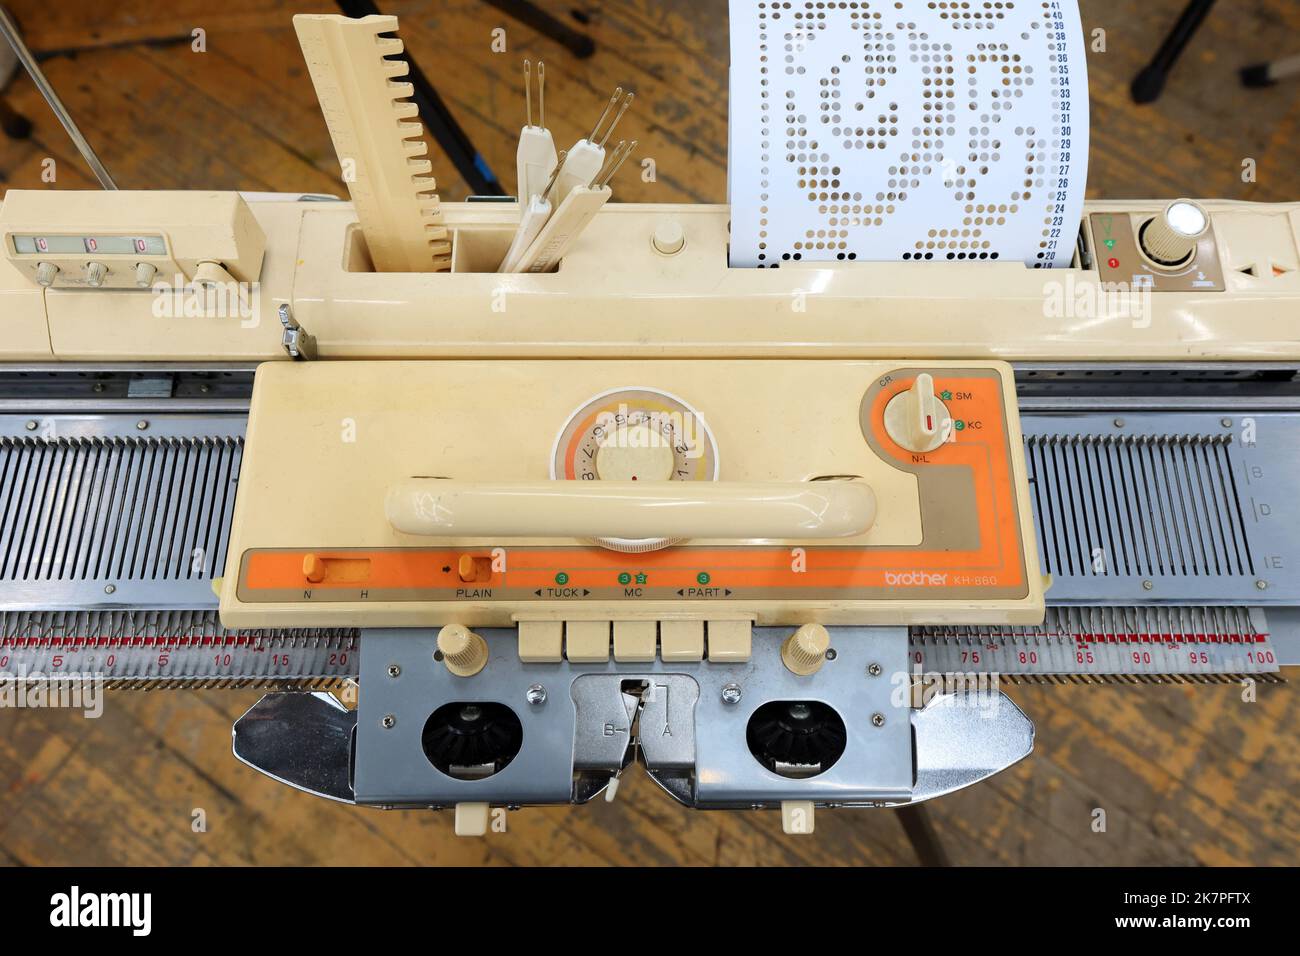 A Brother KH860 Knitting Machine with row counter, punch card, carriage and attached sinker plate on a bed of knitting needles. Stock Photo